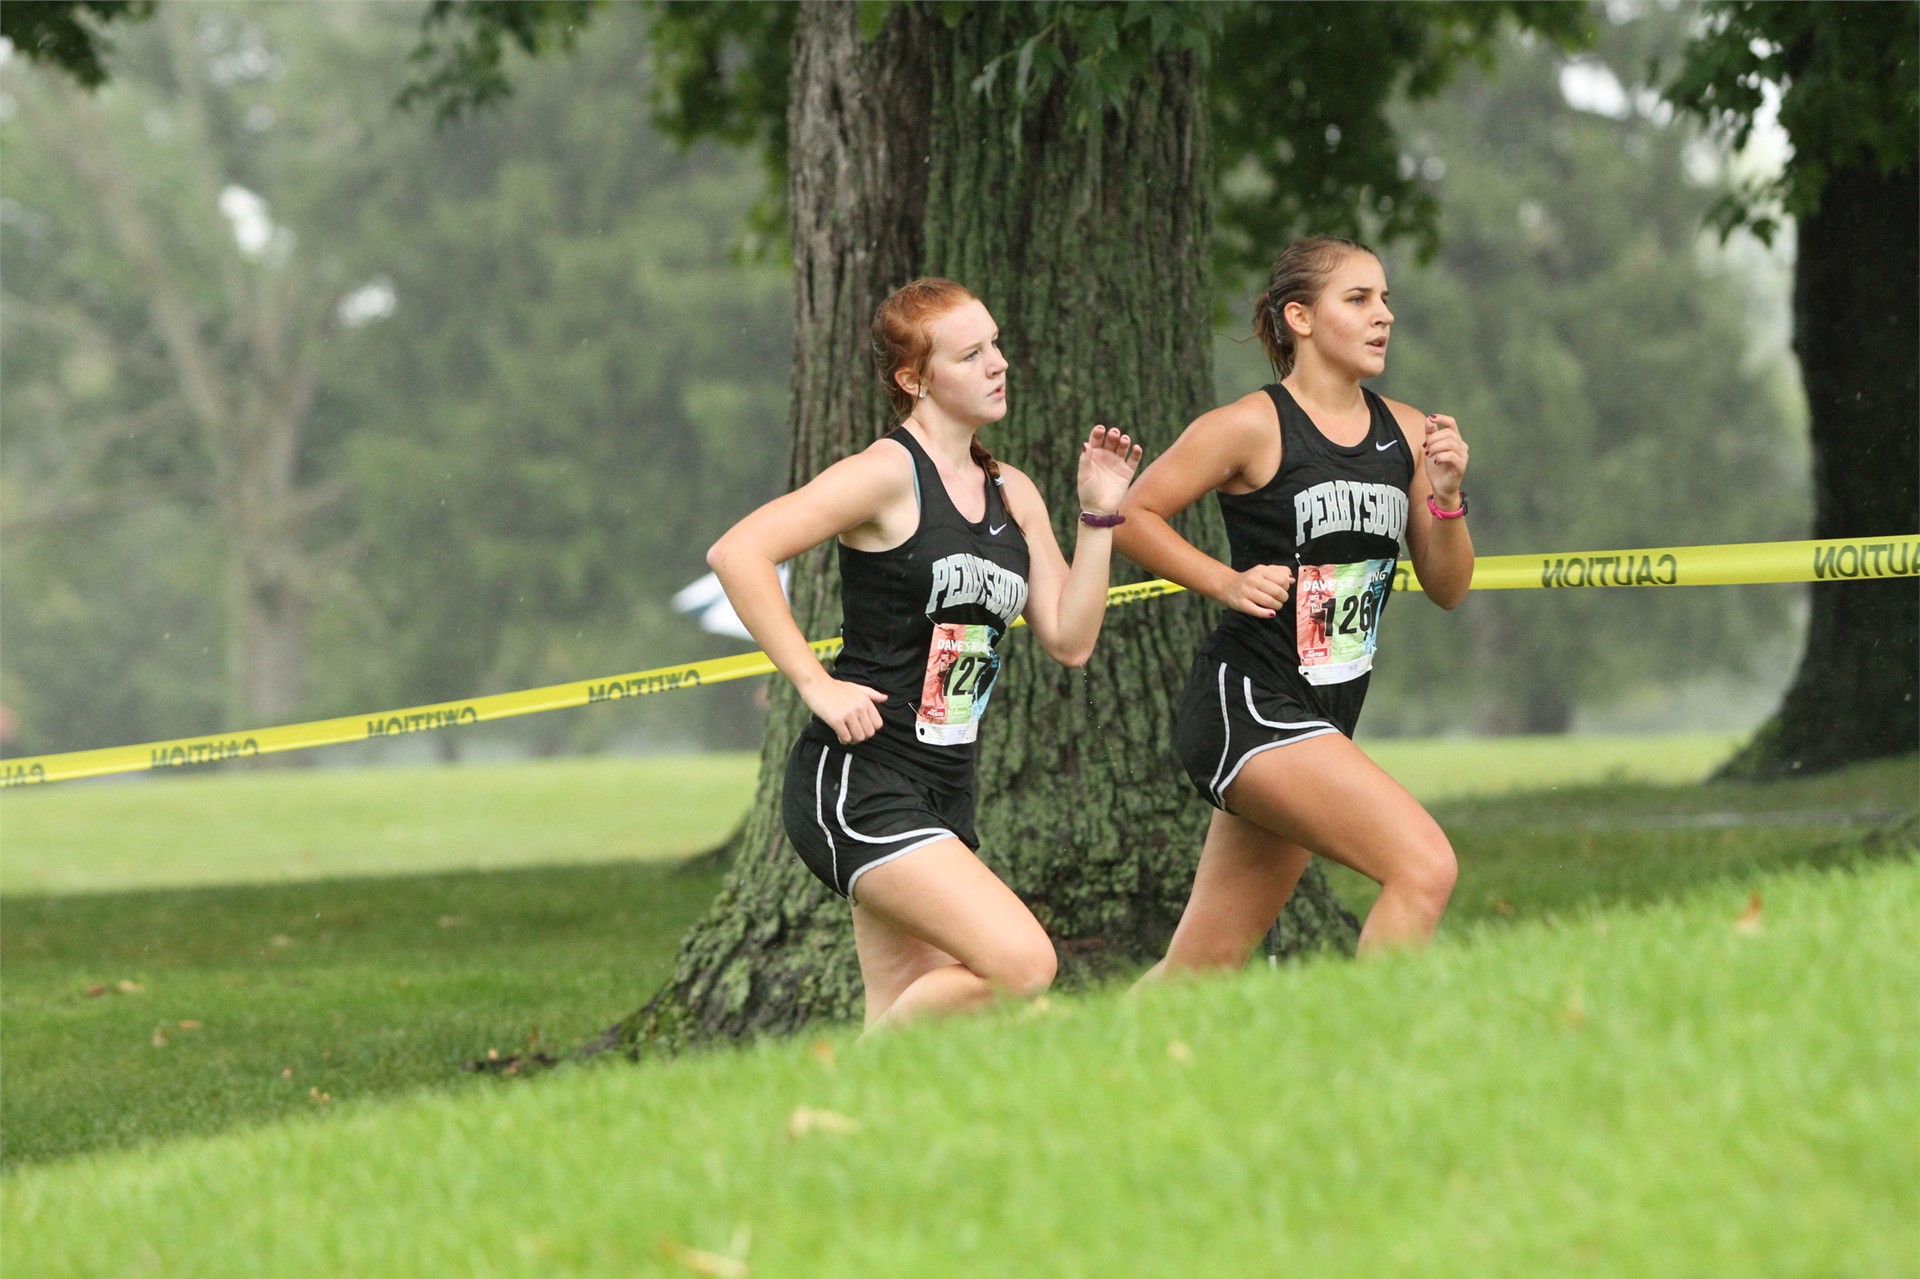 PHS girls cross country runners competing